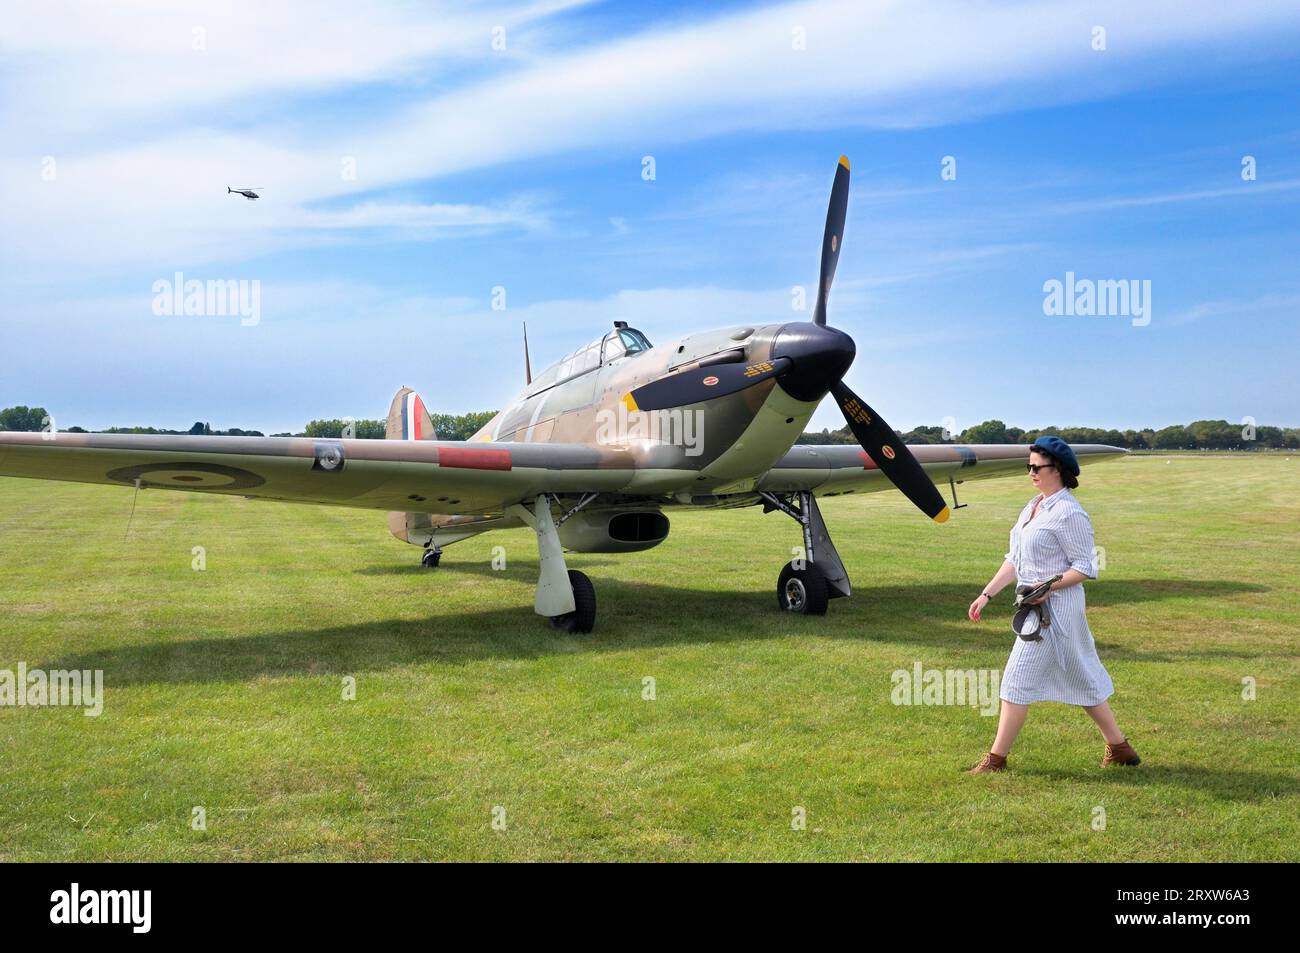 A woman in period attire walking past a Hawker Hurricane Mk.1 P2921 GZ-L fighter plane parked on grass at Goodwood Revival, West Sussex, England, UK Stock Photo